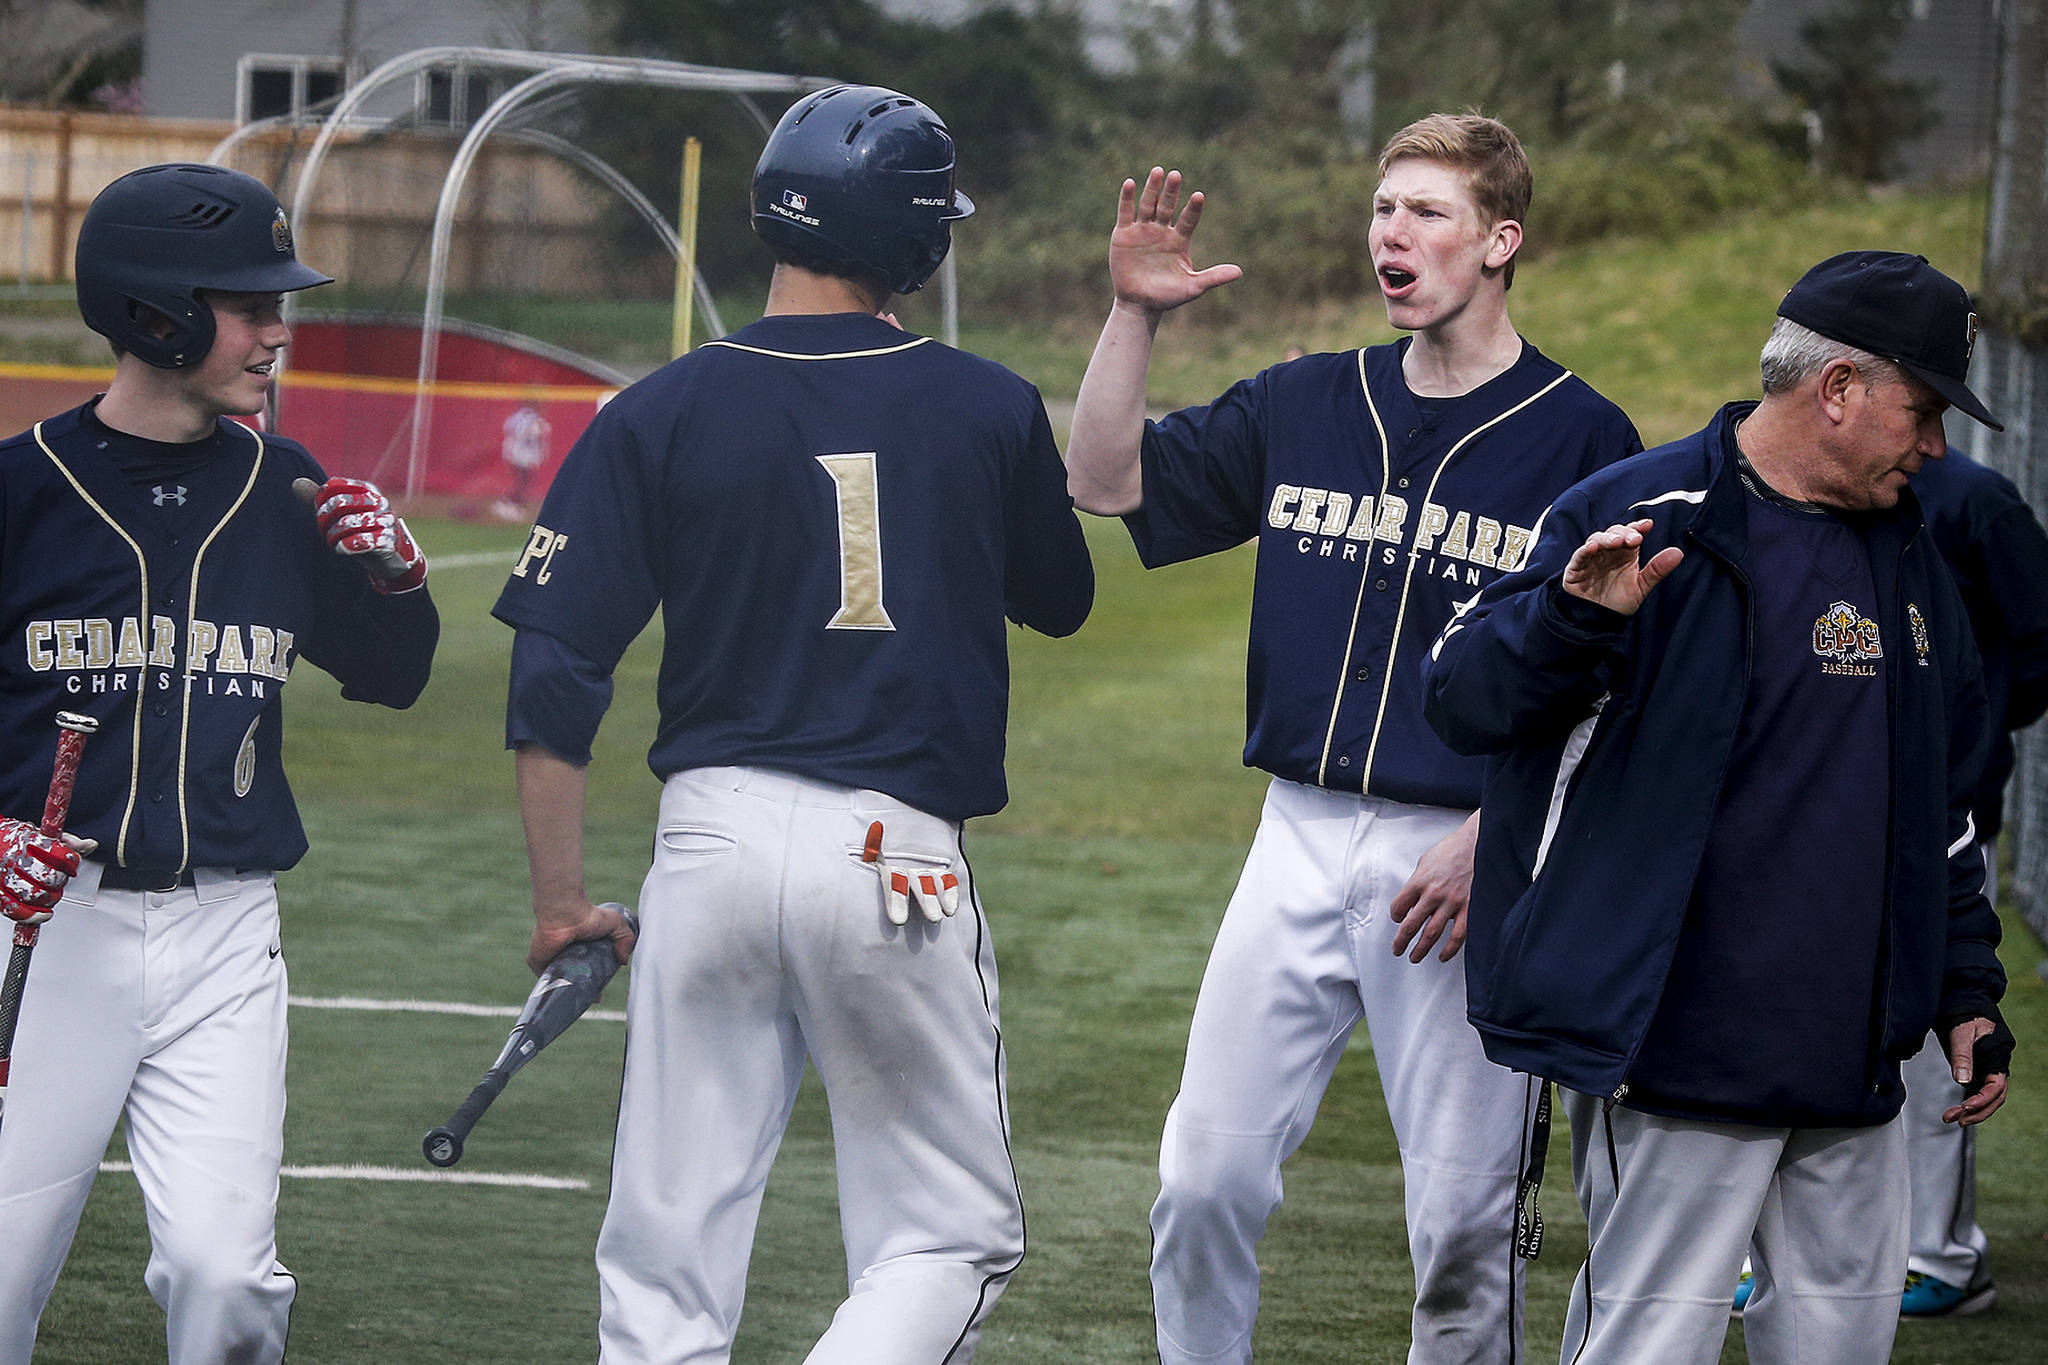 Cedar Park Christian’s George Reidy (right) congratulates teammate Michael Attalah (center) after scoring during a game against Archbishop Murphy on April 11, 2017, at Archbishop Murphy High School in Everett. (Ian Terry / The Herald)